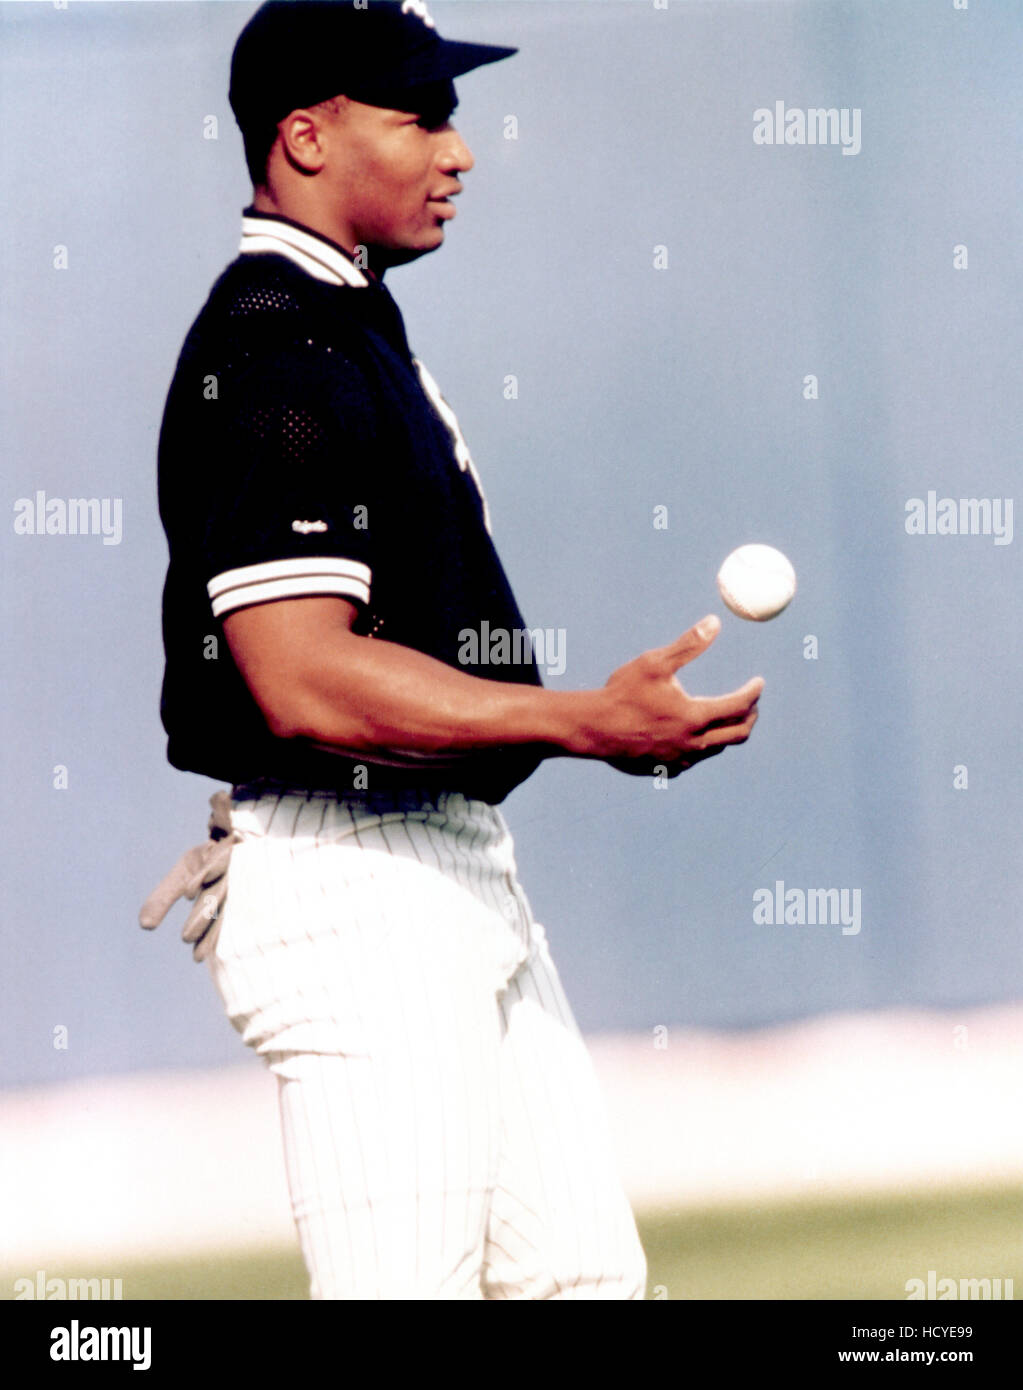 Bo Jackson, playing baseball for the Chicago White Sox, in the late 1980s-early 1990s. Stock Photo